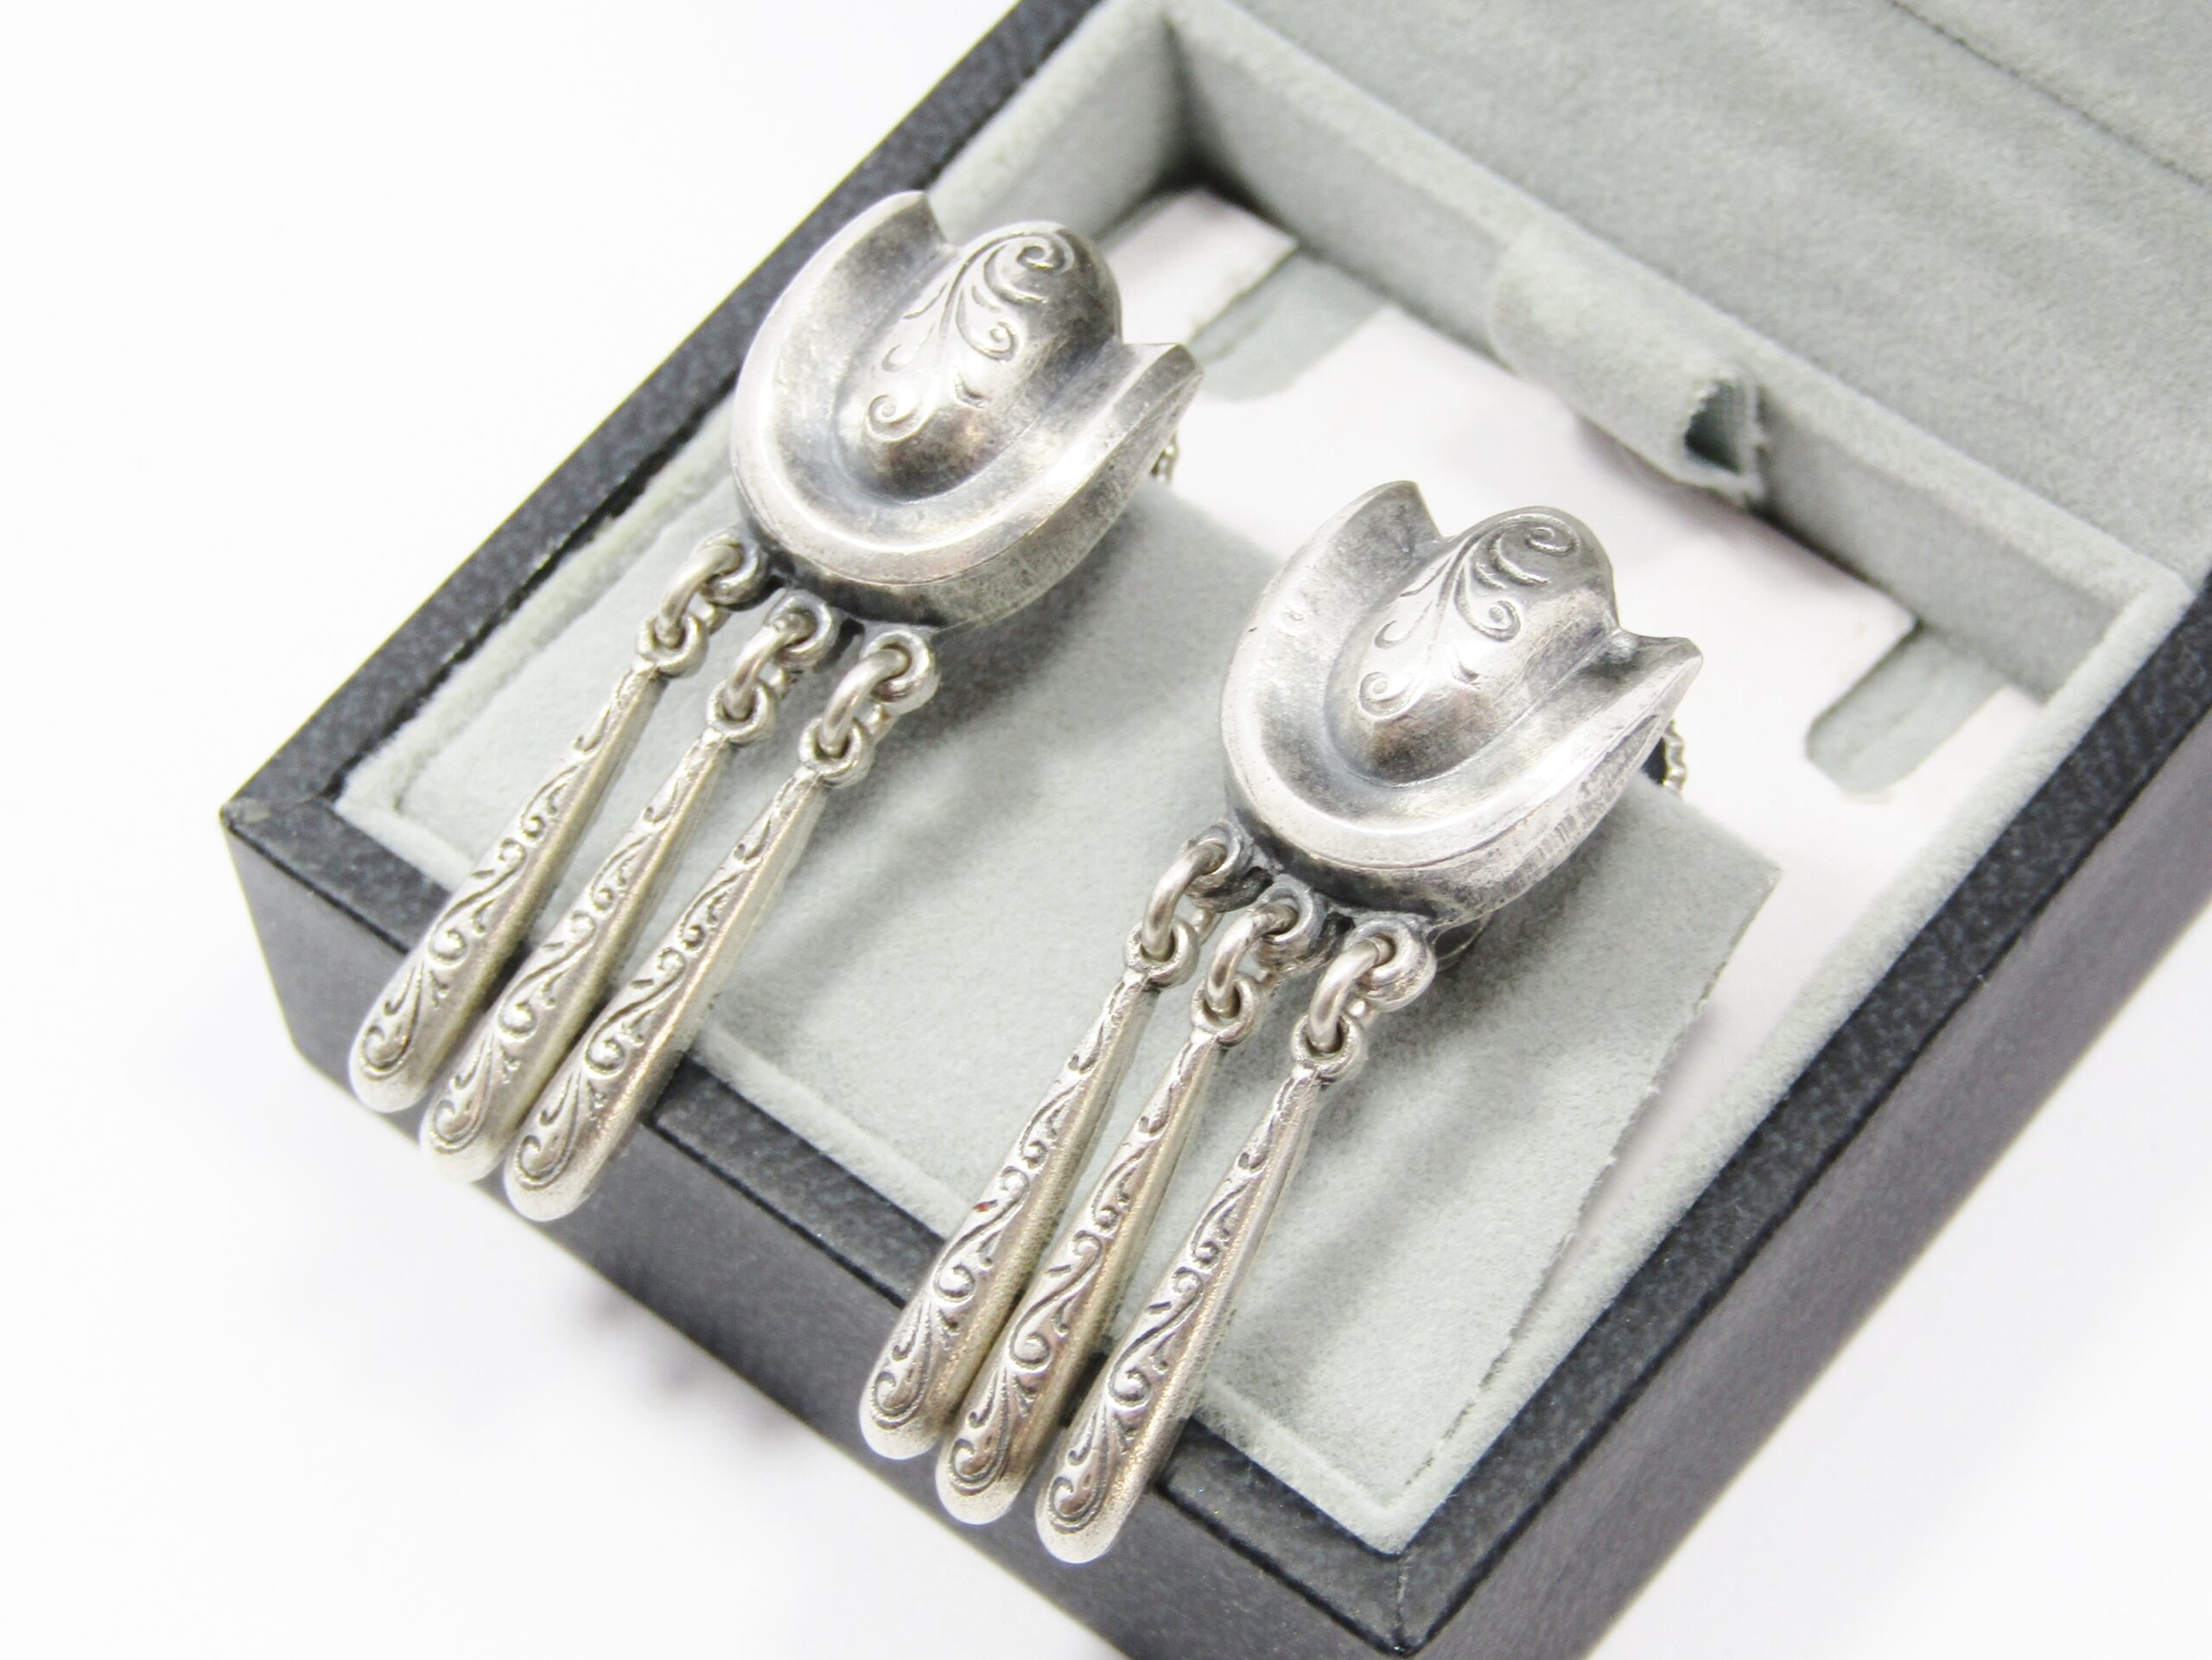 A Gorgeous Pair of Vintage Design Dangling Earrings With Screw Backs in Sterling Silver